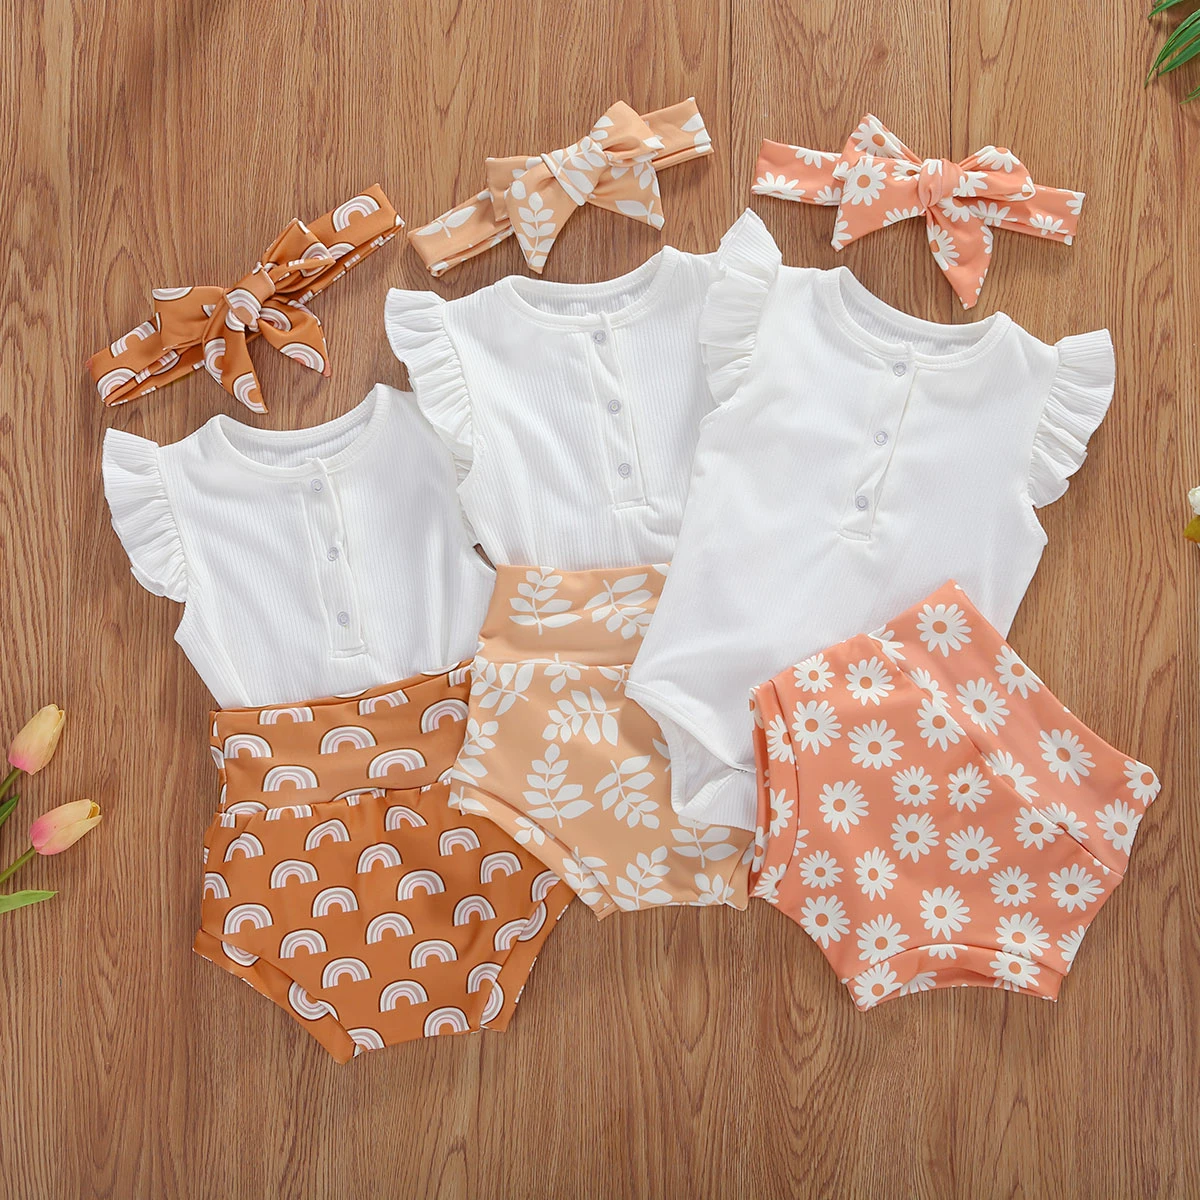 baby clothes penguin set Baby Girl Floral Clothes Sets Summer Baby Girls Ruffles Short Sleeve Romper Tops + Sun Flower Printed Shorts + Headband Outfits baby clothing set essentials